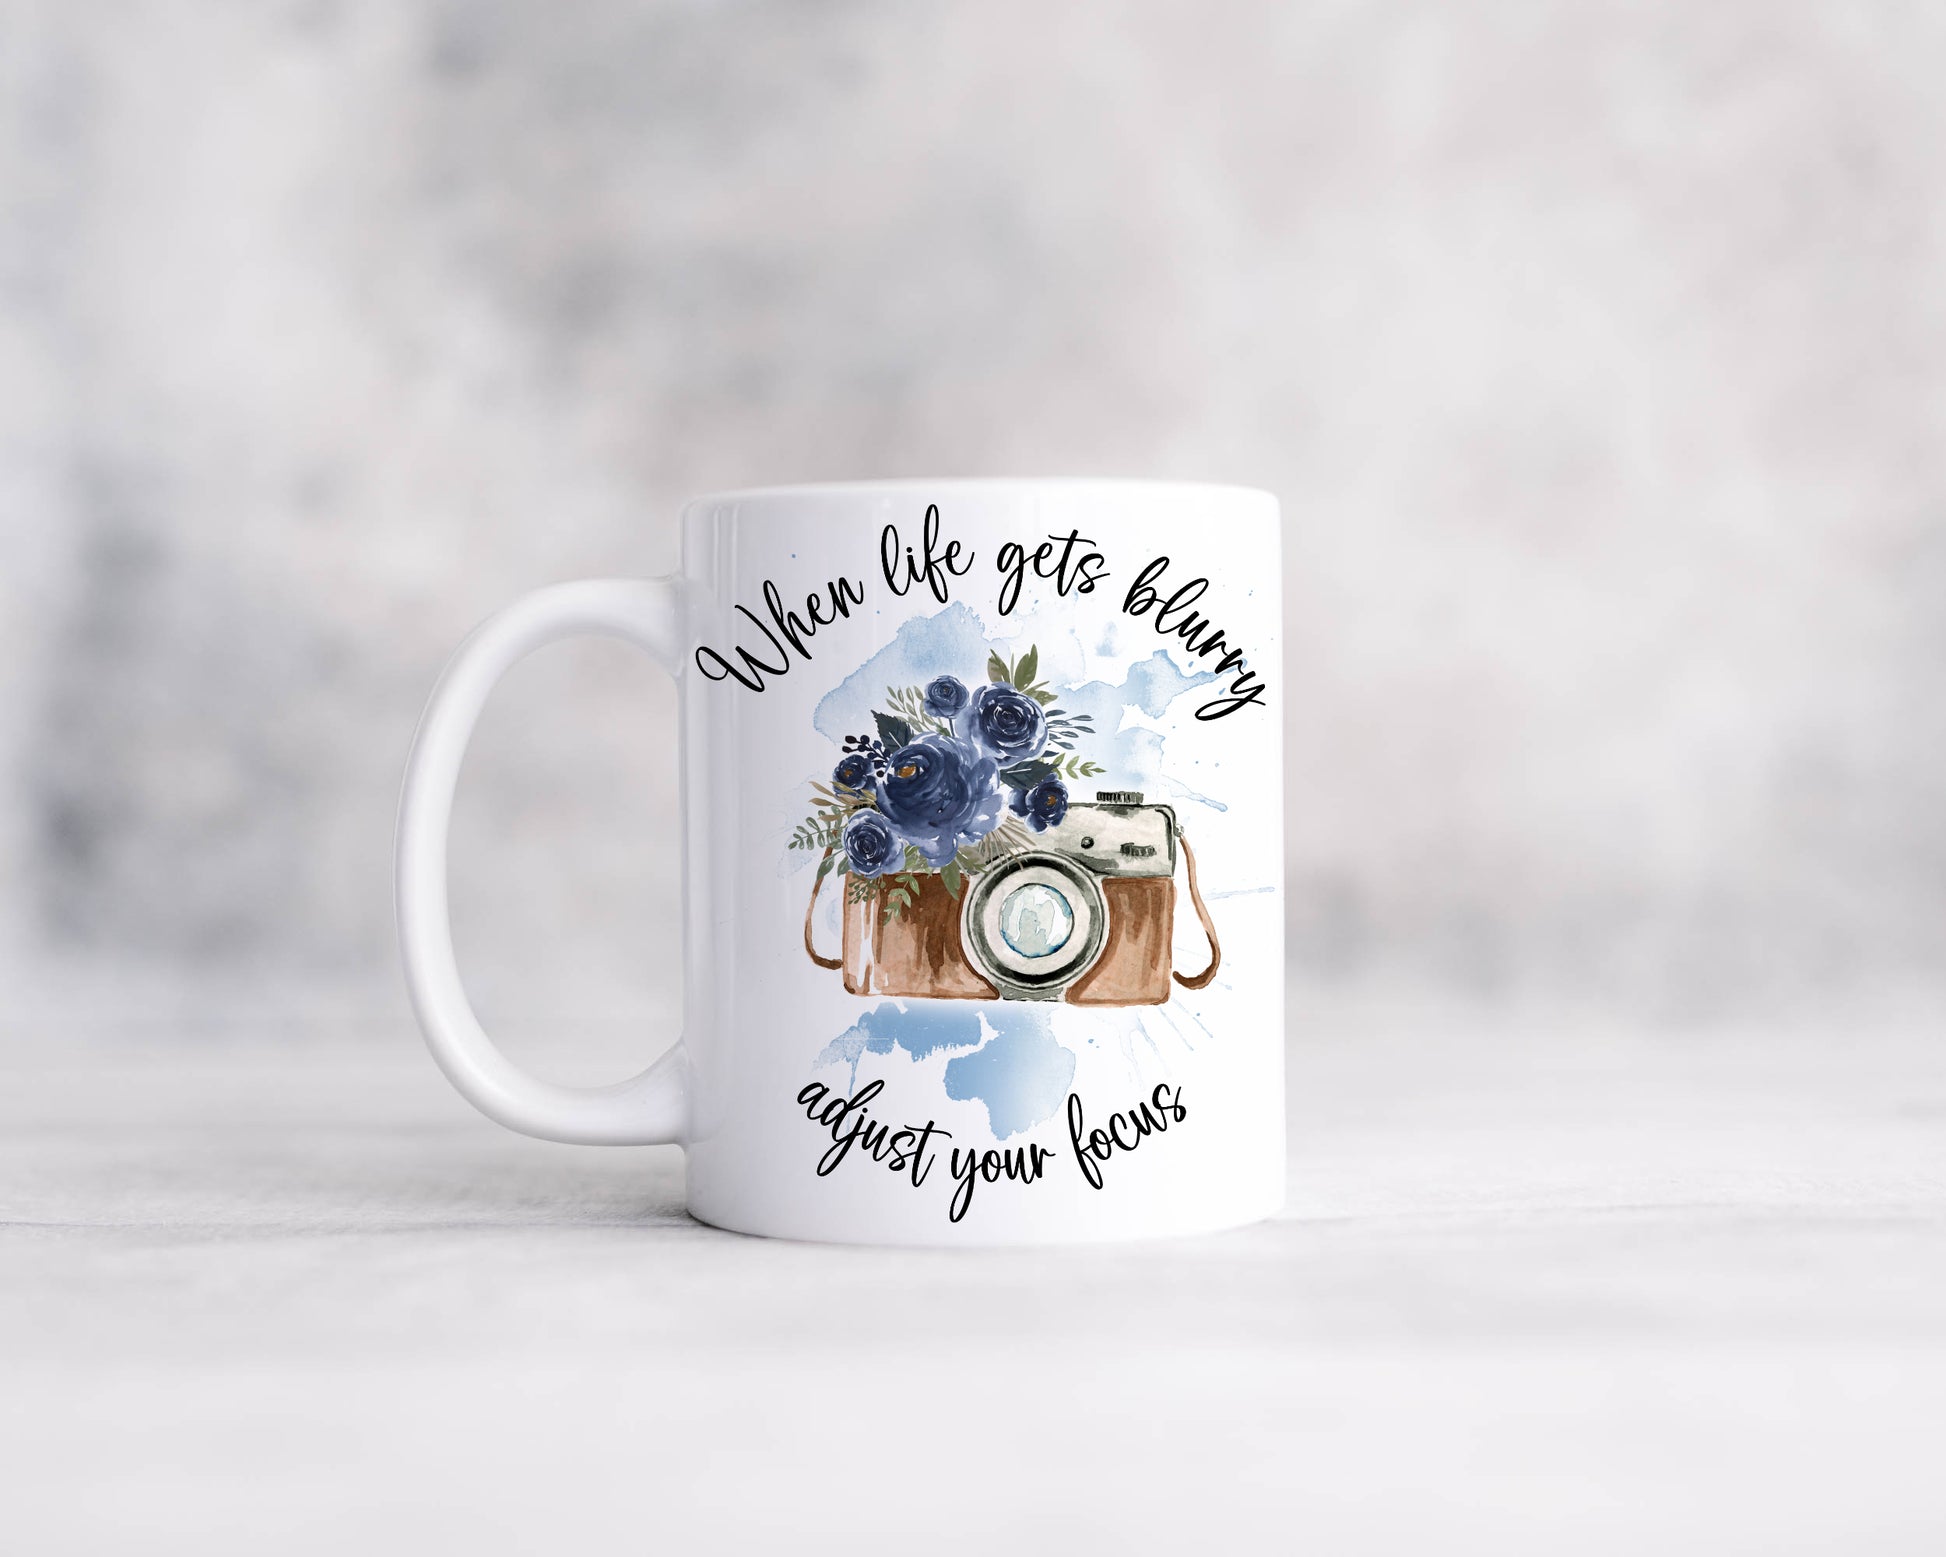 Retro camera design with blue flowers on a blue watercolour splash with the text 'When life gets blurry, adjust your focus'